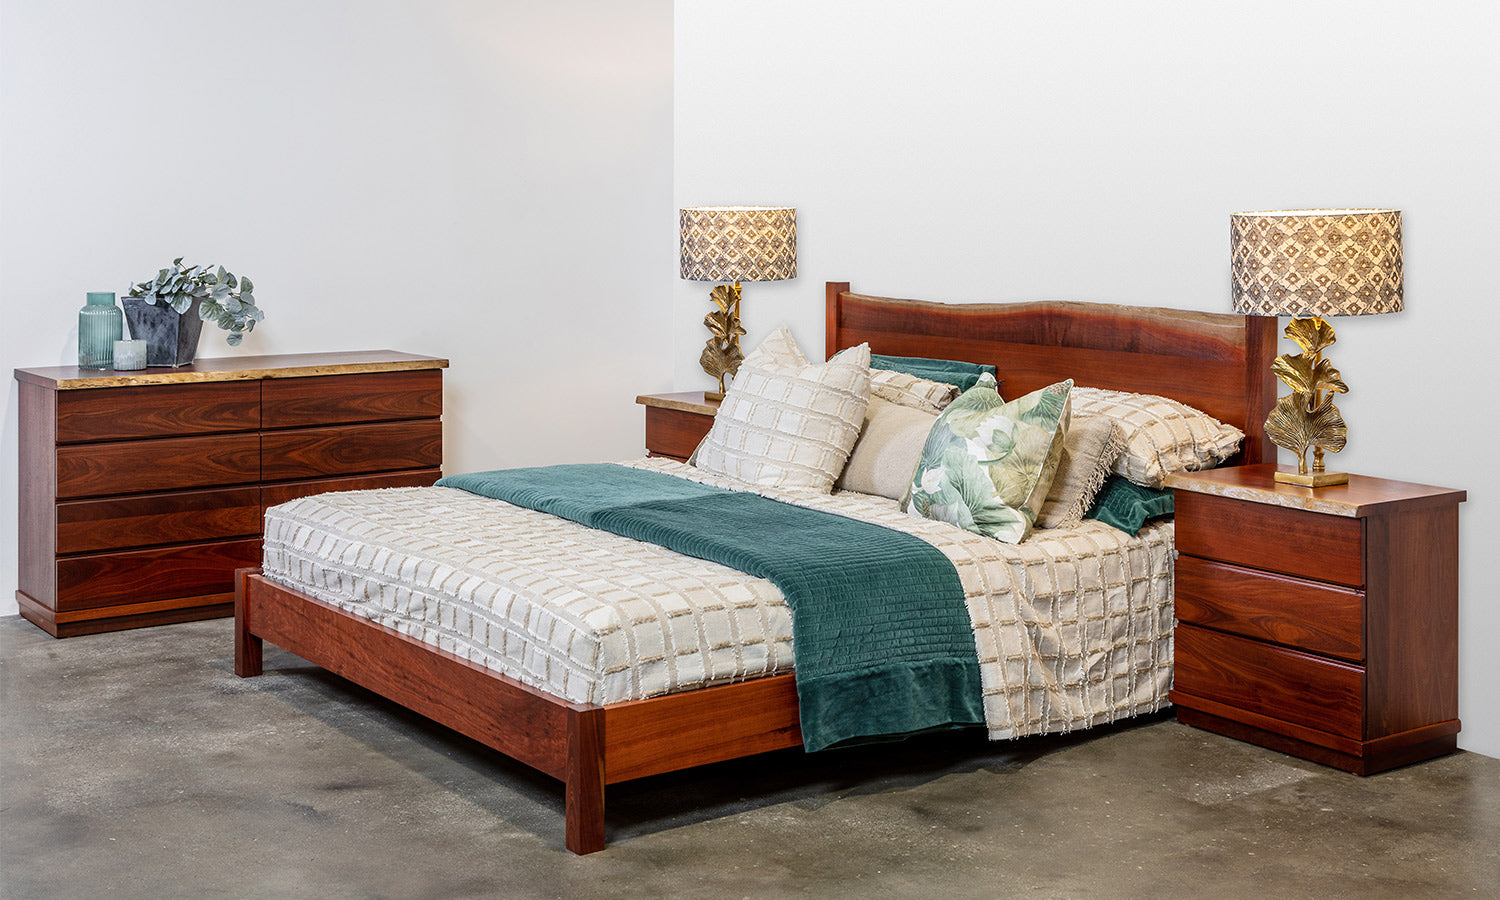 Naturaliste Natural Edge Solid Jarrah Timber Queen or King Bed and Bedroom Suite Made in Perth, WA